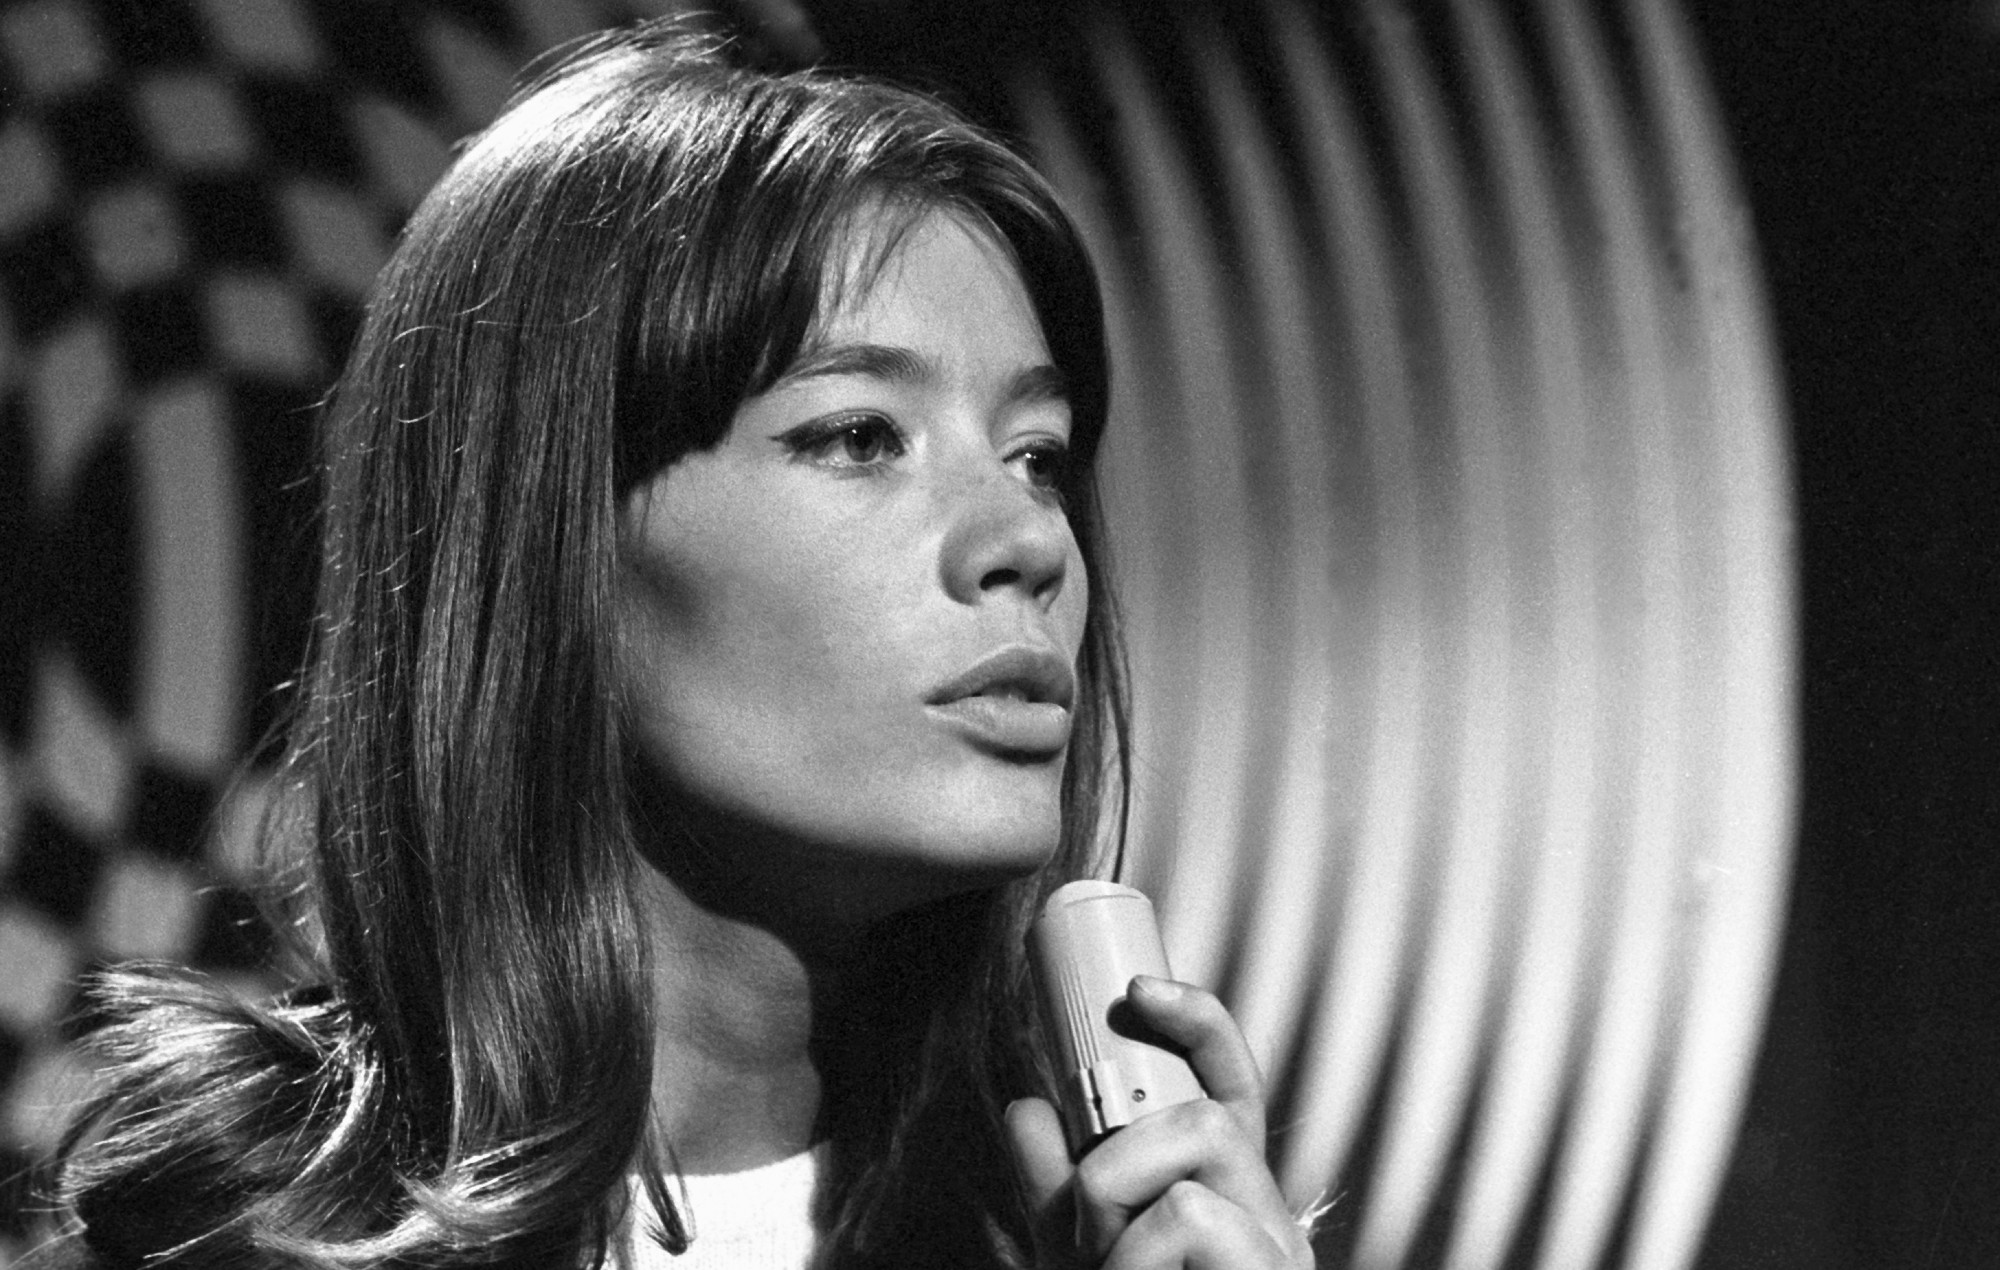 Francoise Hardy recording a song for the television